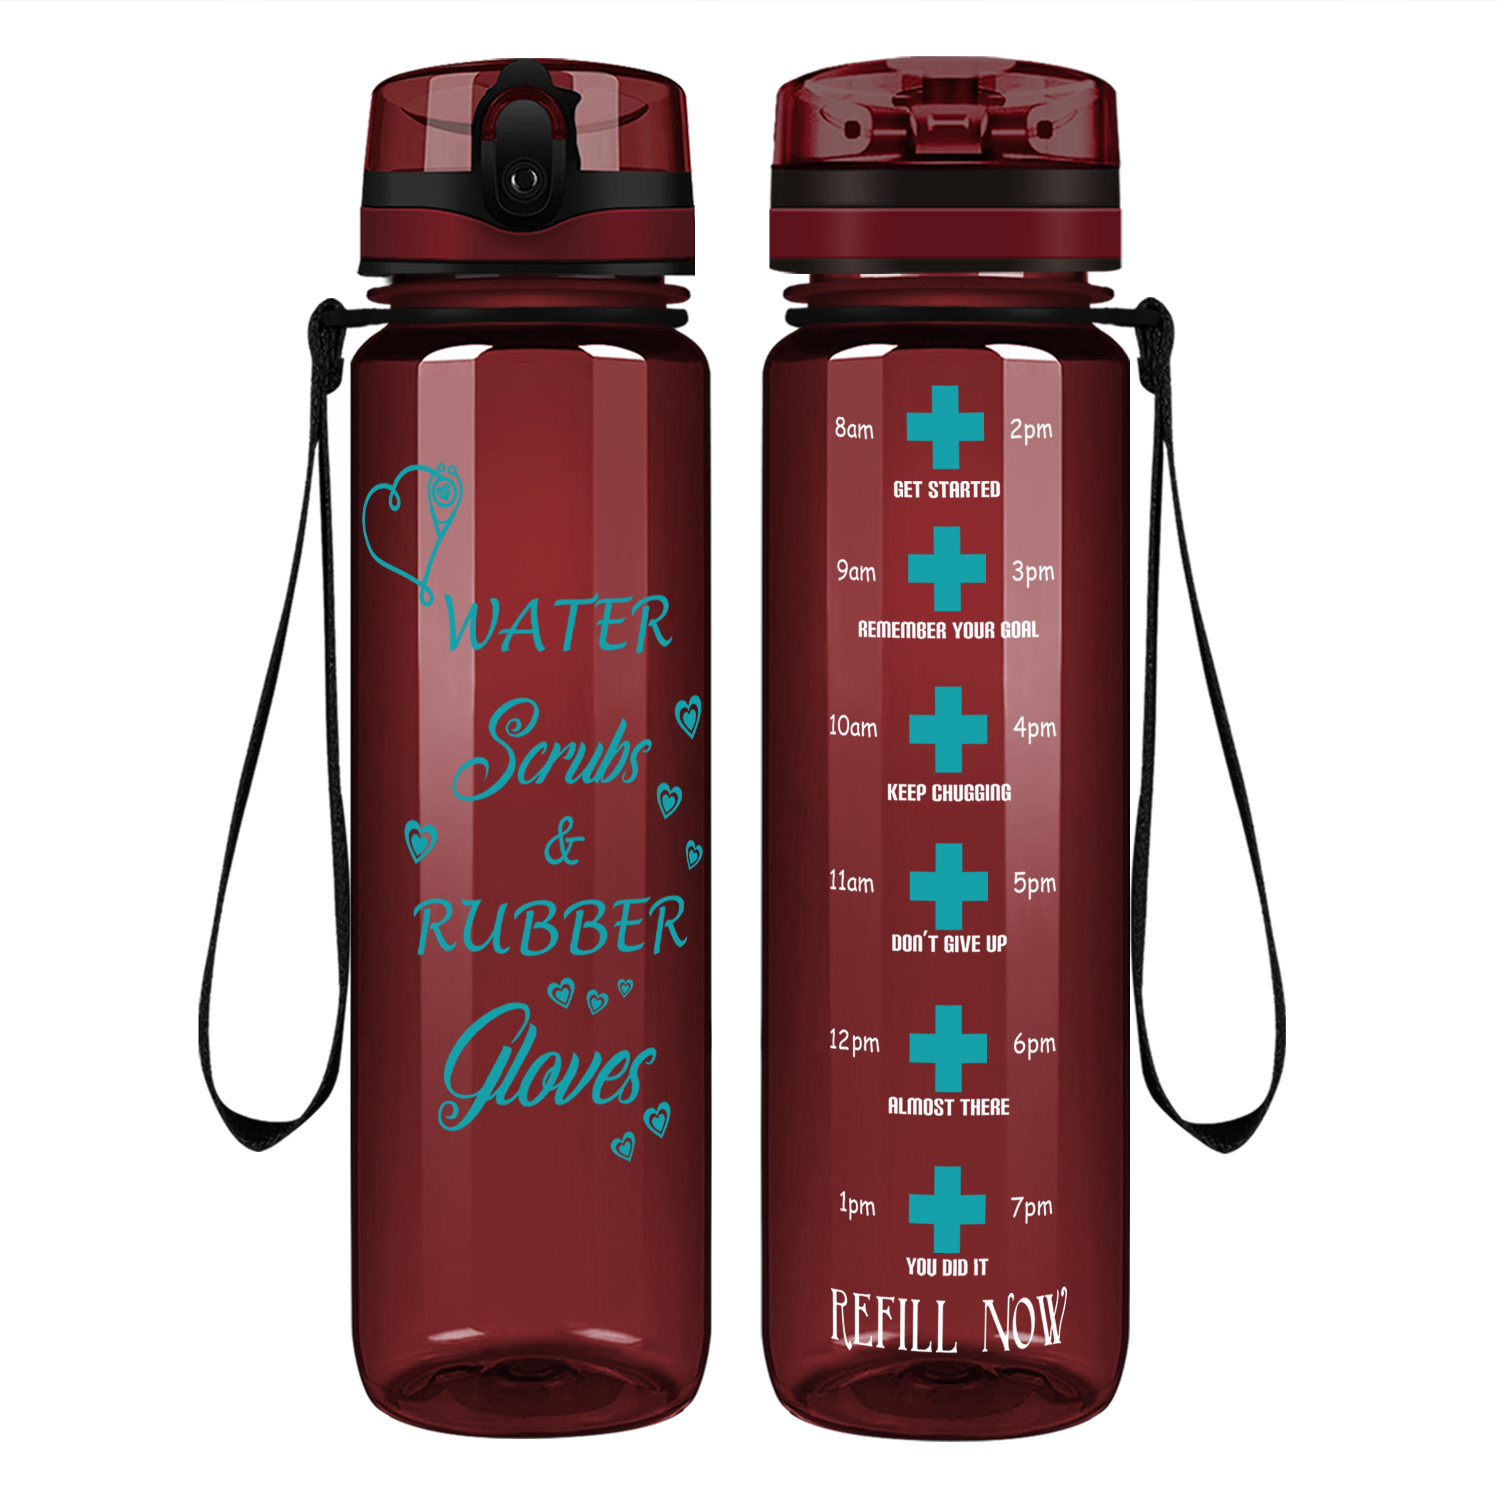 Personalized Nurse Water Scrubs Rubber Gloves Motivational Bottle - Jolly  Family Gifts